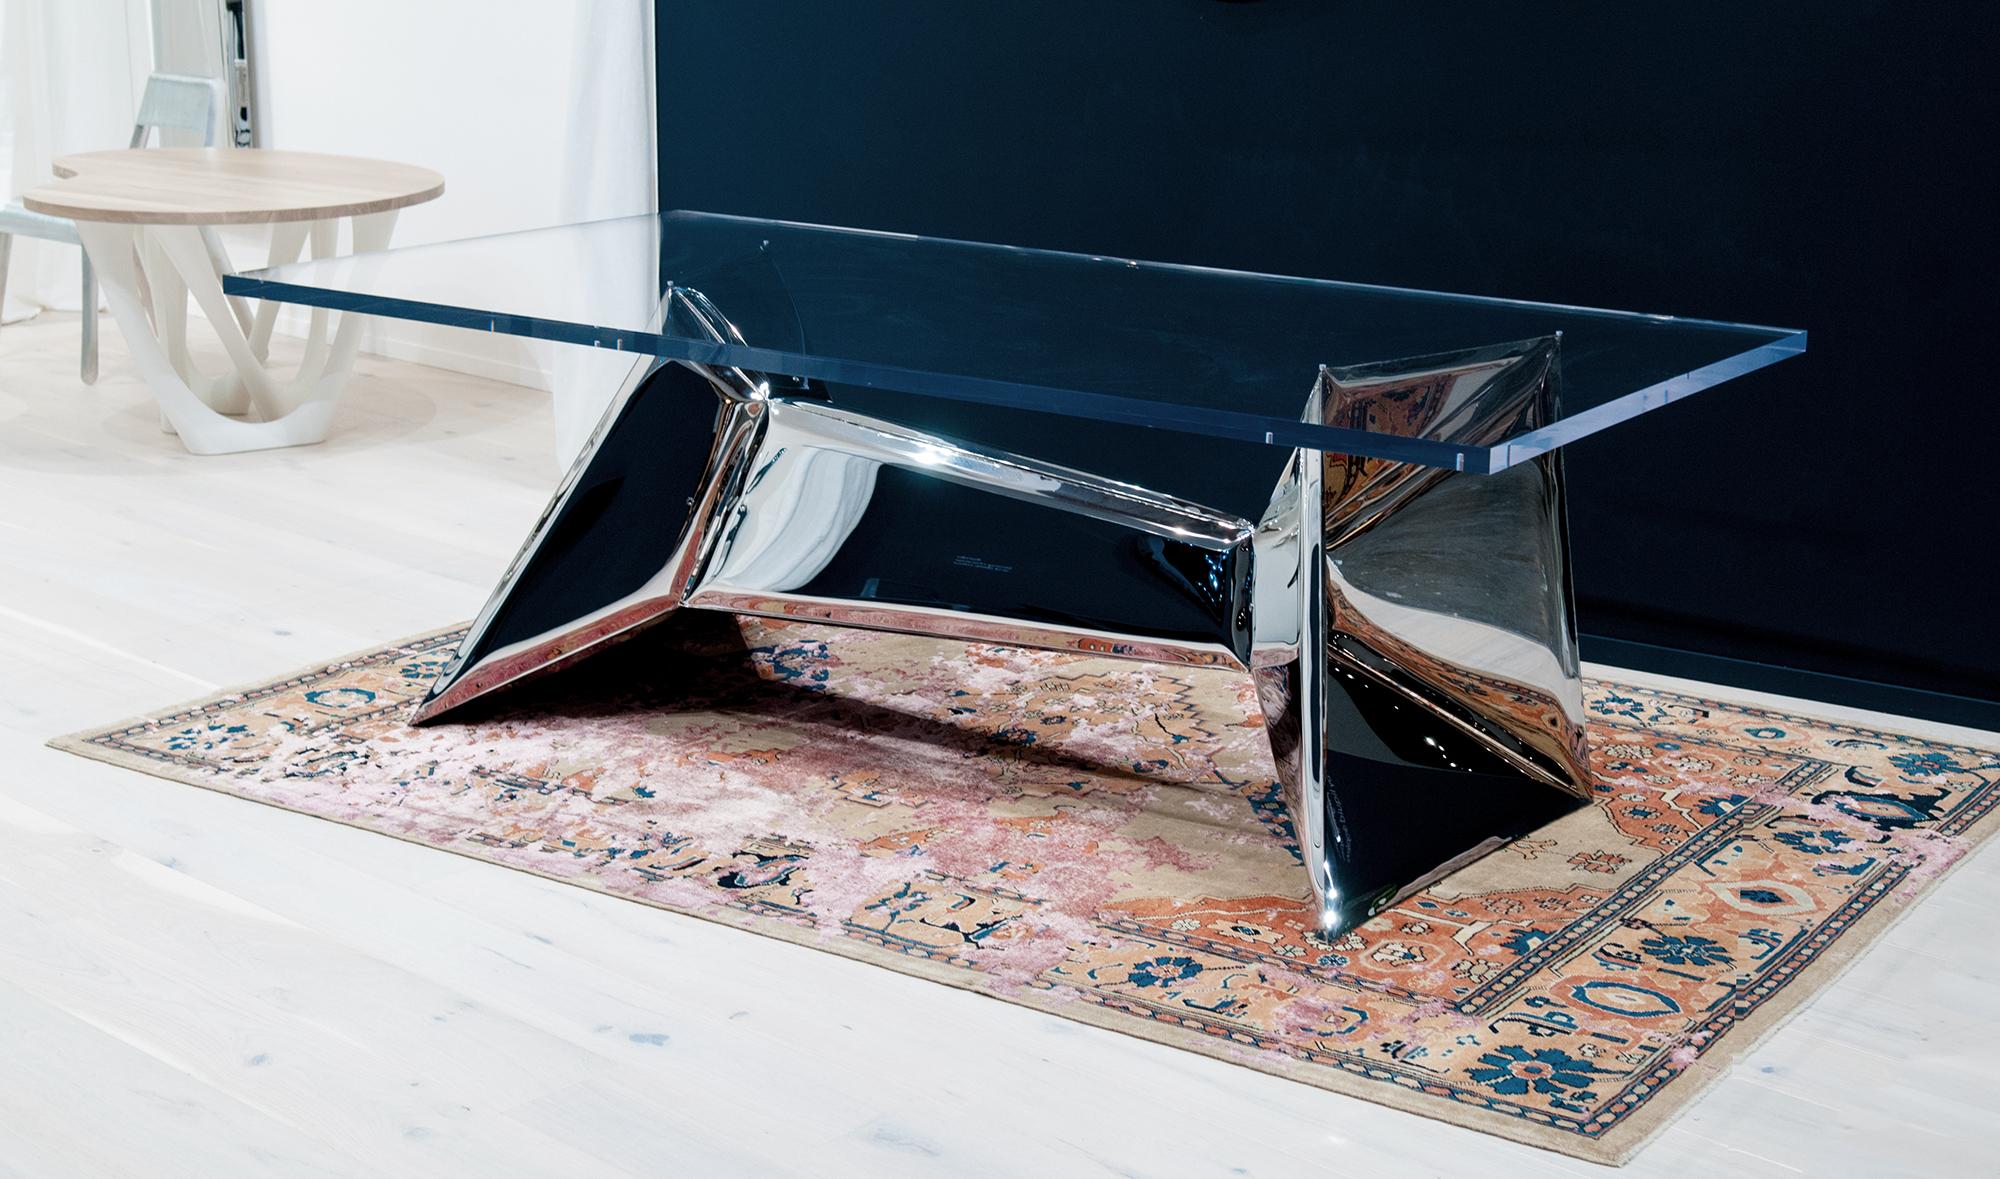 Crystals table by Zieta Prozessdesign
Stainless steel (polished) base
Acrylic top
Measures: 220 x 110 x 73cm

Crystals table is a brand new concept and evolution of the diamond inspired series of objects. The inner part of the Crystals table